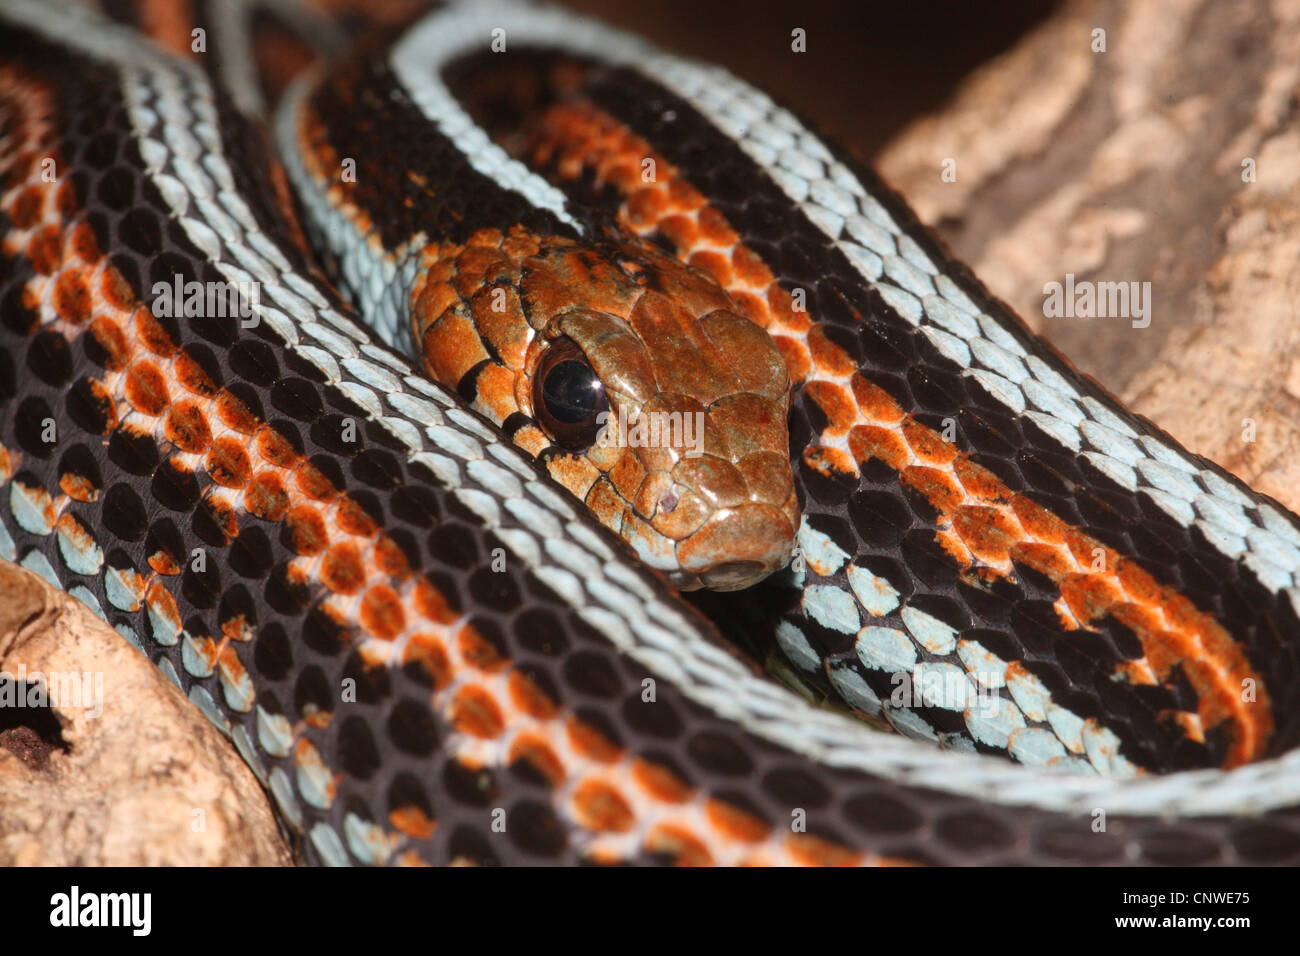 Couleuvre rayée (Thamnophis sirtalis), enroulé Banque D'Images